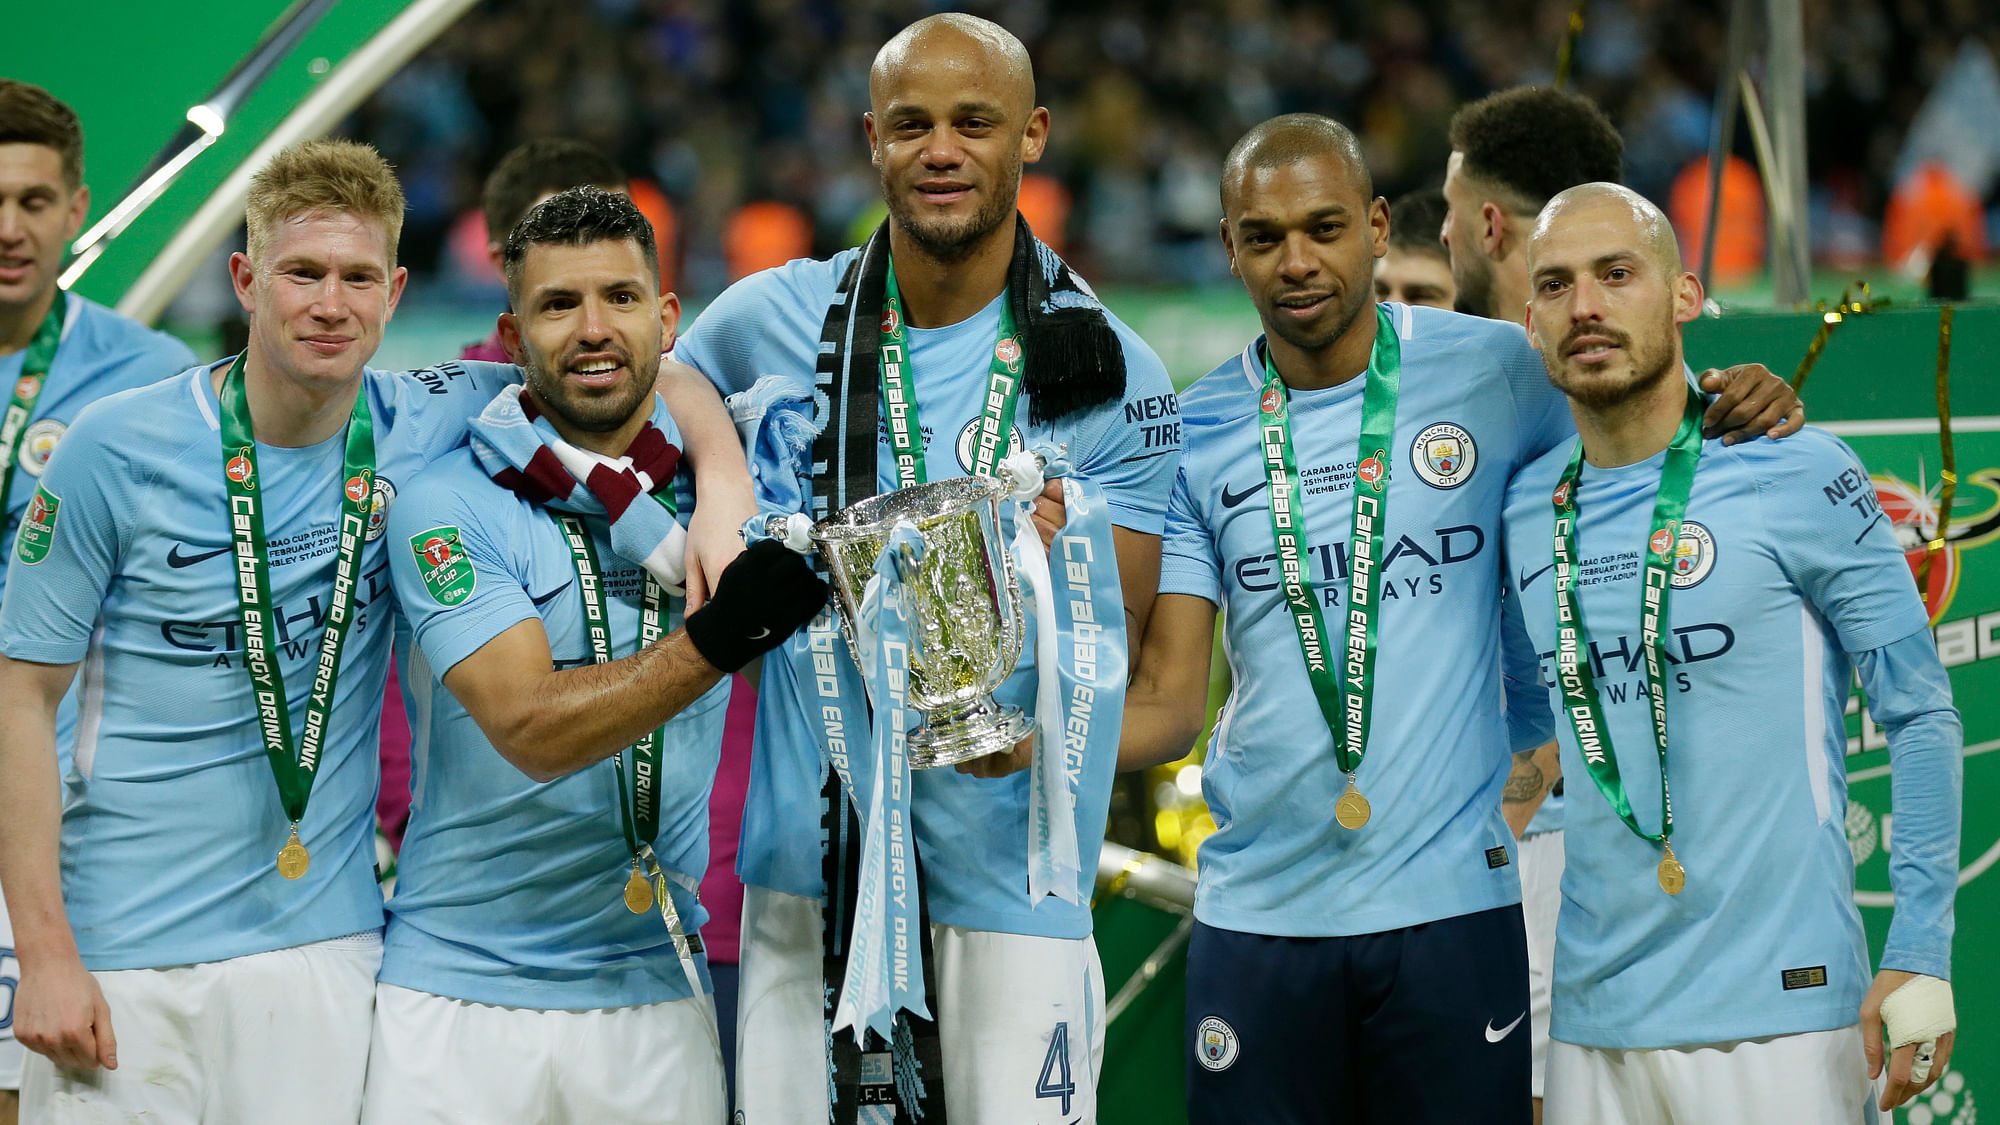 Manchester City players celebrate after winning the English League Cup Final against Arsenal 3-0 at Wembley stadium in London on Sunday.